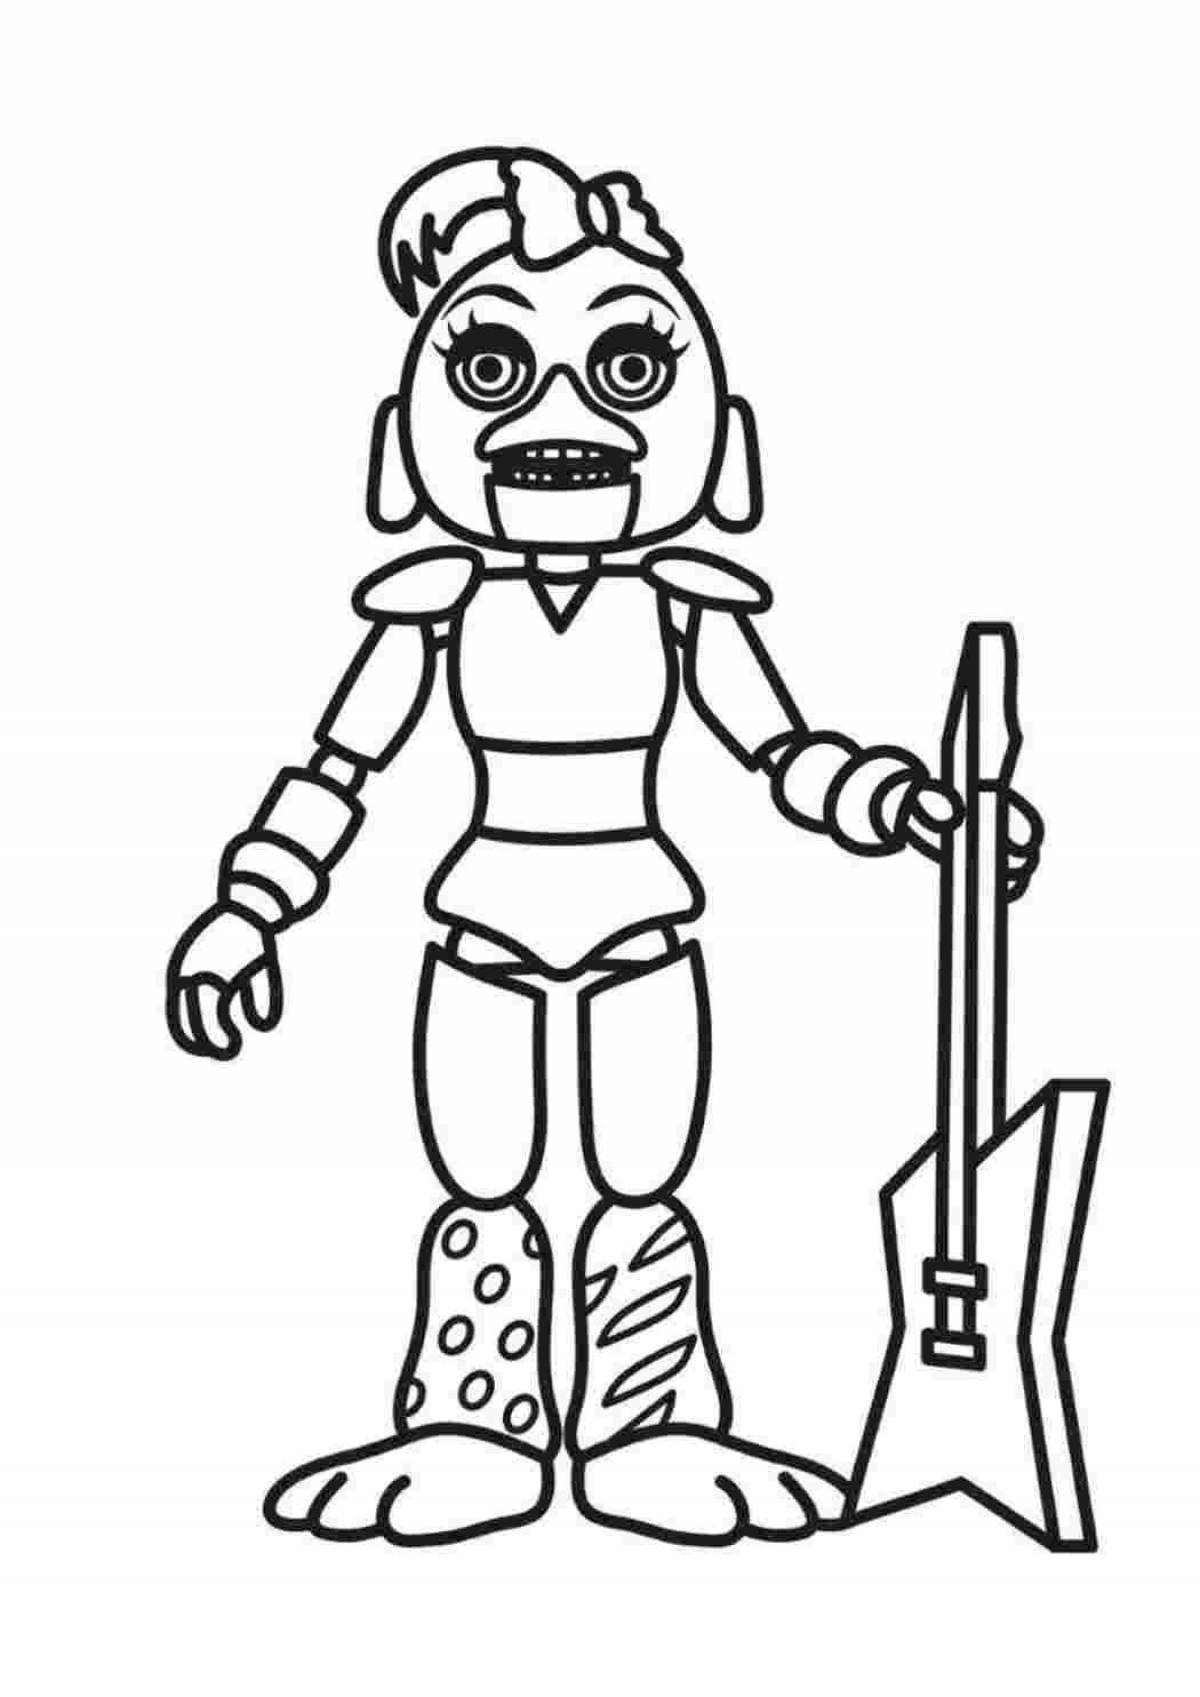 Attractive Chica fnaf coloring book